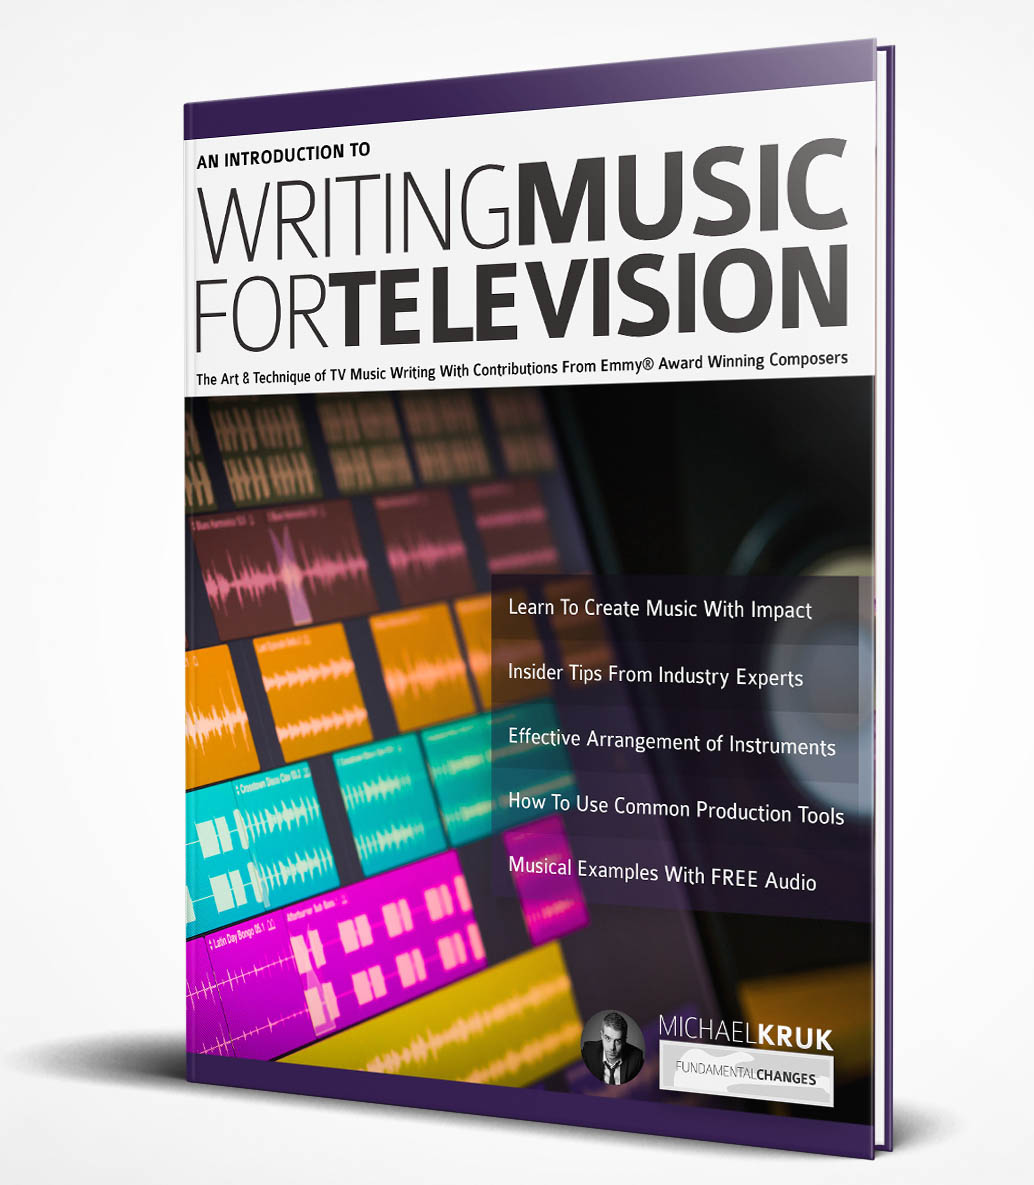 An Introduction to Writing Music for Television